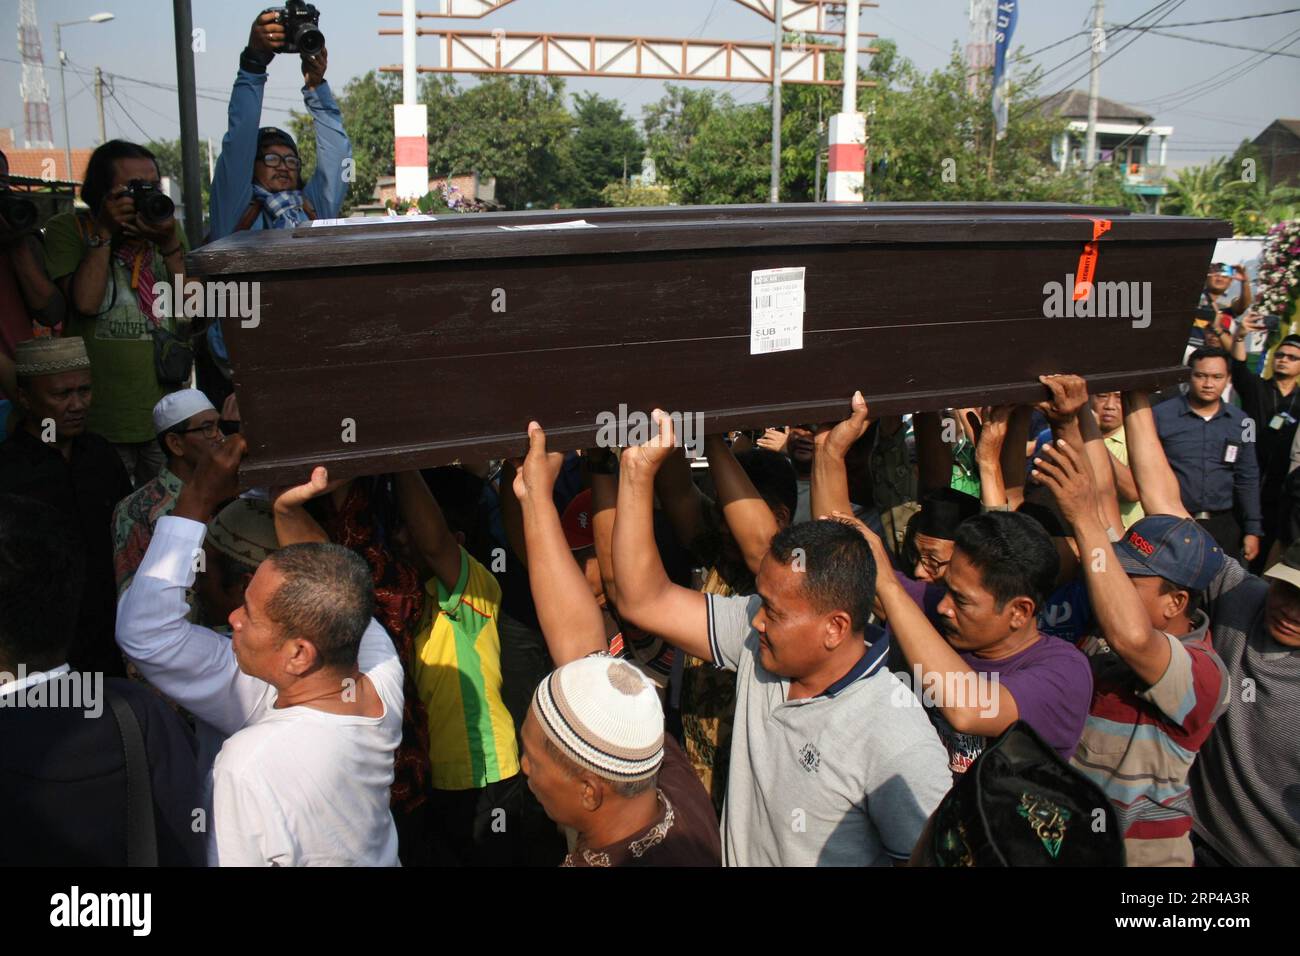 (181101) -- JAKARTA, Nov. 1, 2018 -- Relatives carry the coffin of Jannatun Cintya Dewi, a passanger who died in the crash of Lion Air JT 610, during a funeral in Sidoarjo, East Java, Indonesia, Tuesday, Nov. 1, 2018. ) (lrz) INDONESIA-LION AIR-JT 610-CRASH-AFTERMATH Kurniawan PUBLICATIONxNOTxINxCHN Stock Photo